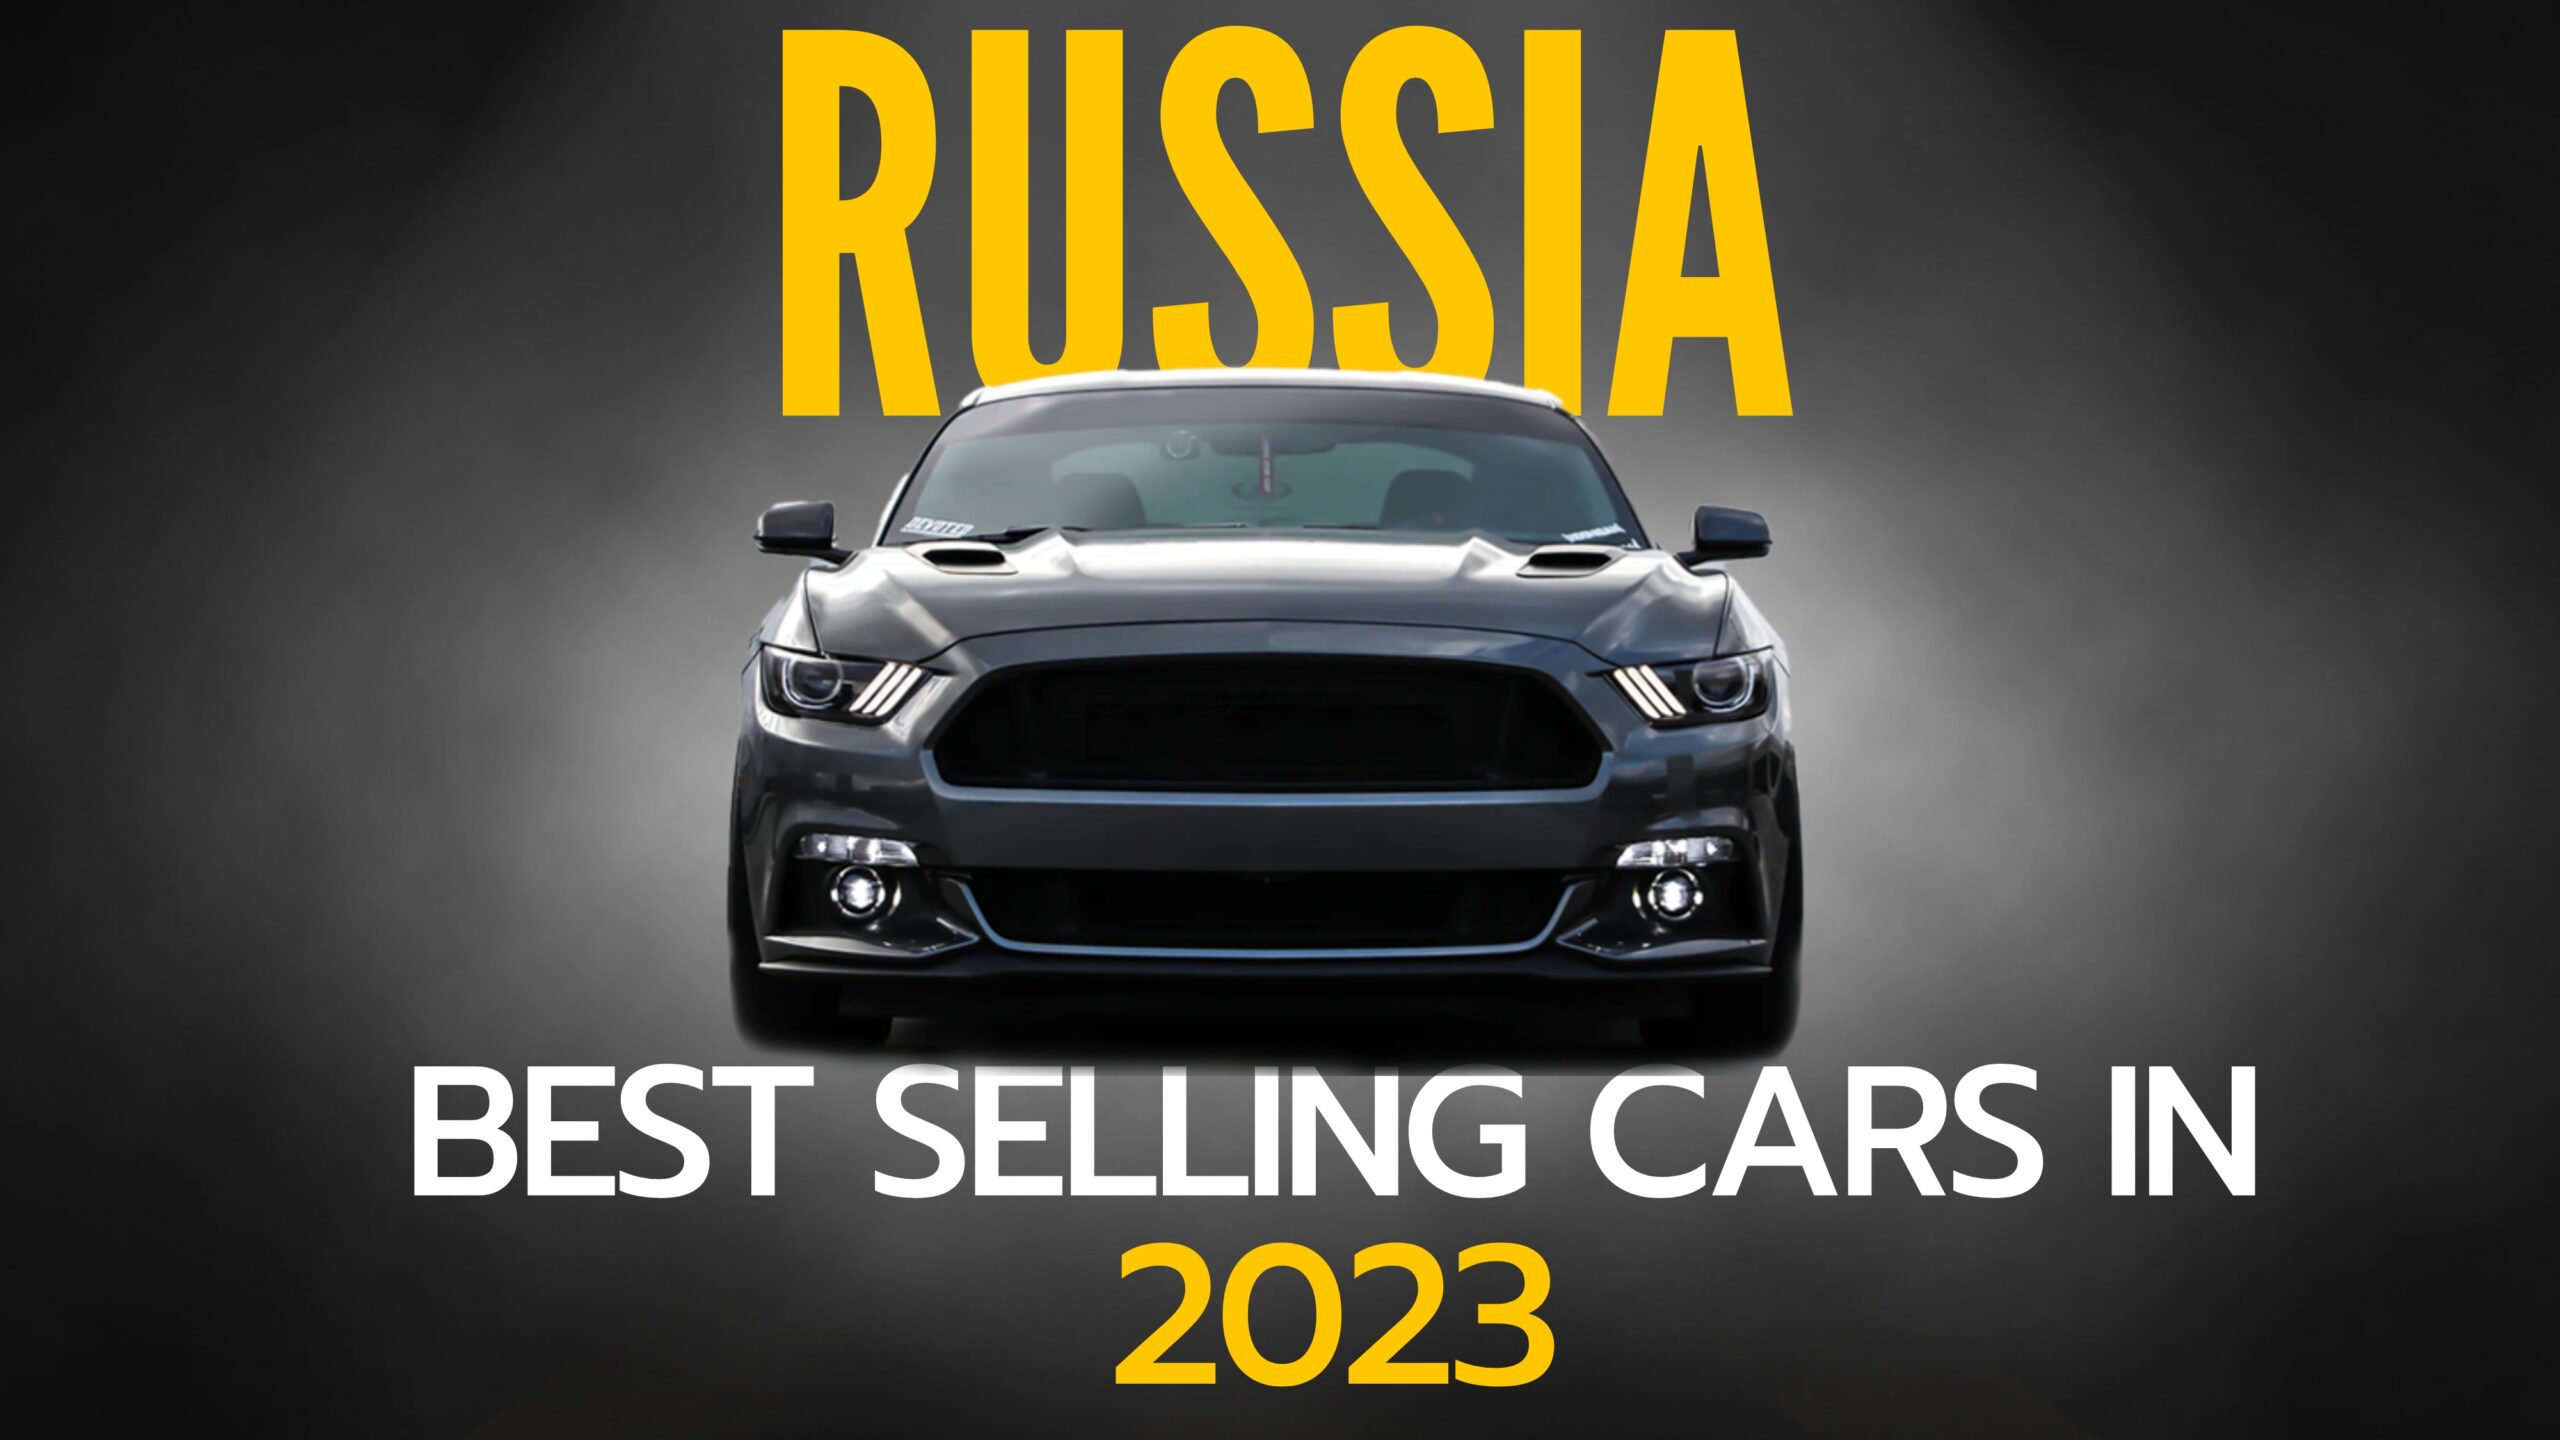 Russia Best Selling Cars IN 2023